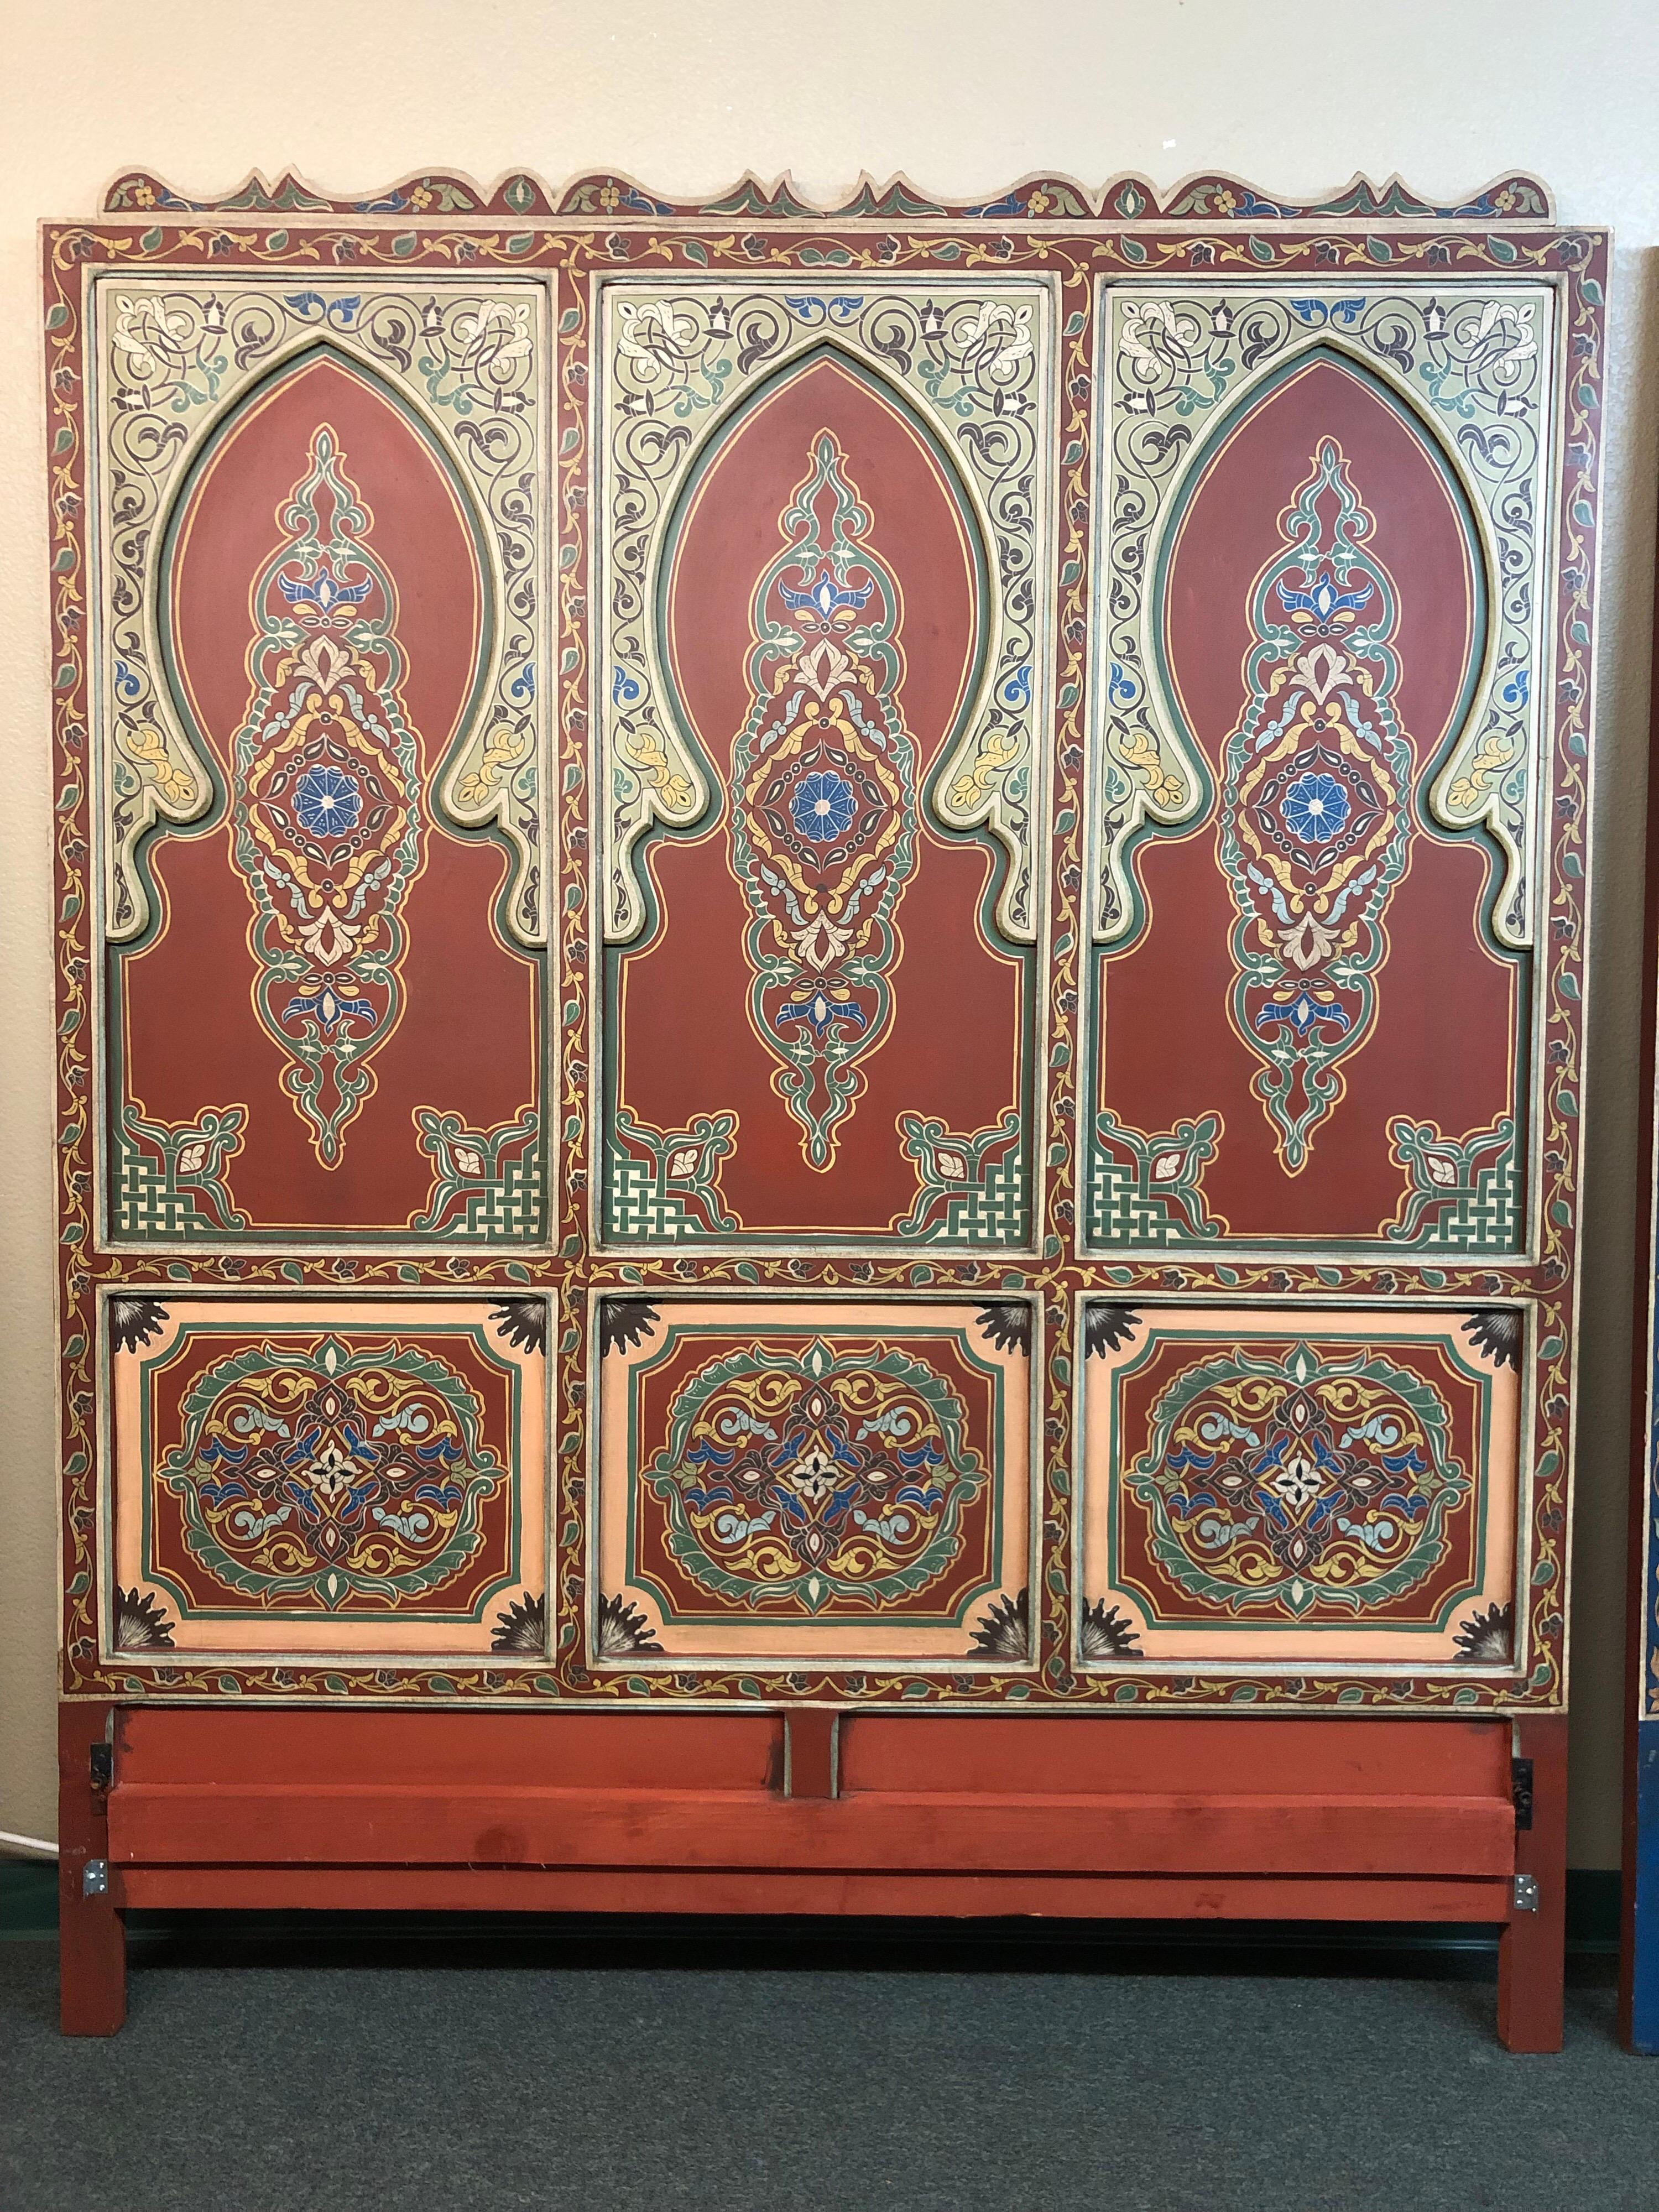 Stunning custom bedroom set, handcrafted in Morocco. Referencing traditional carved elements and rich colors of the country, the queen bed frame and pair of nightstands are an exotic delight that transports one to another time and place. Three